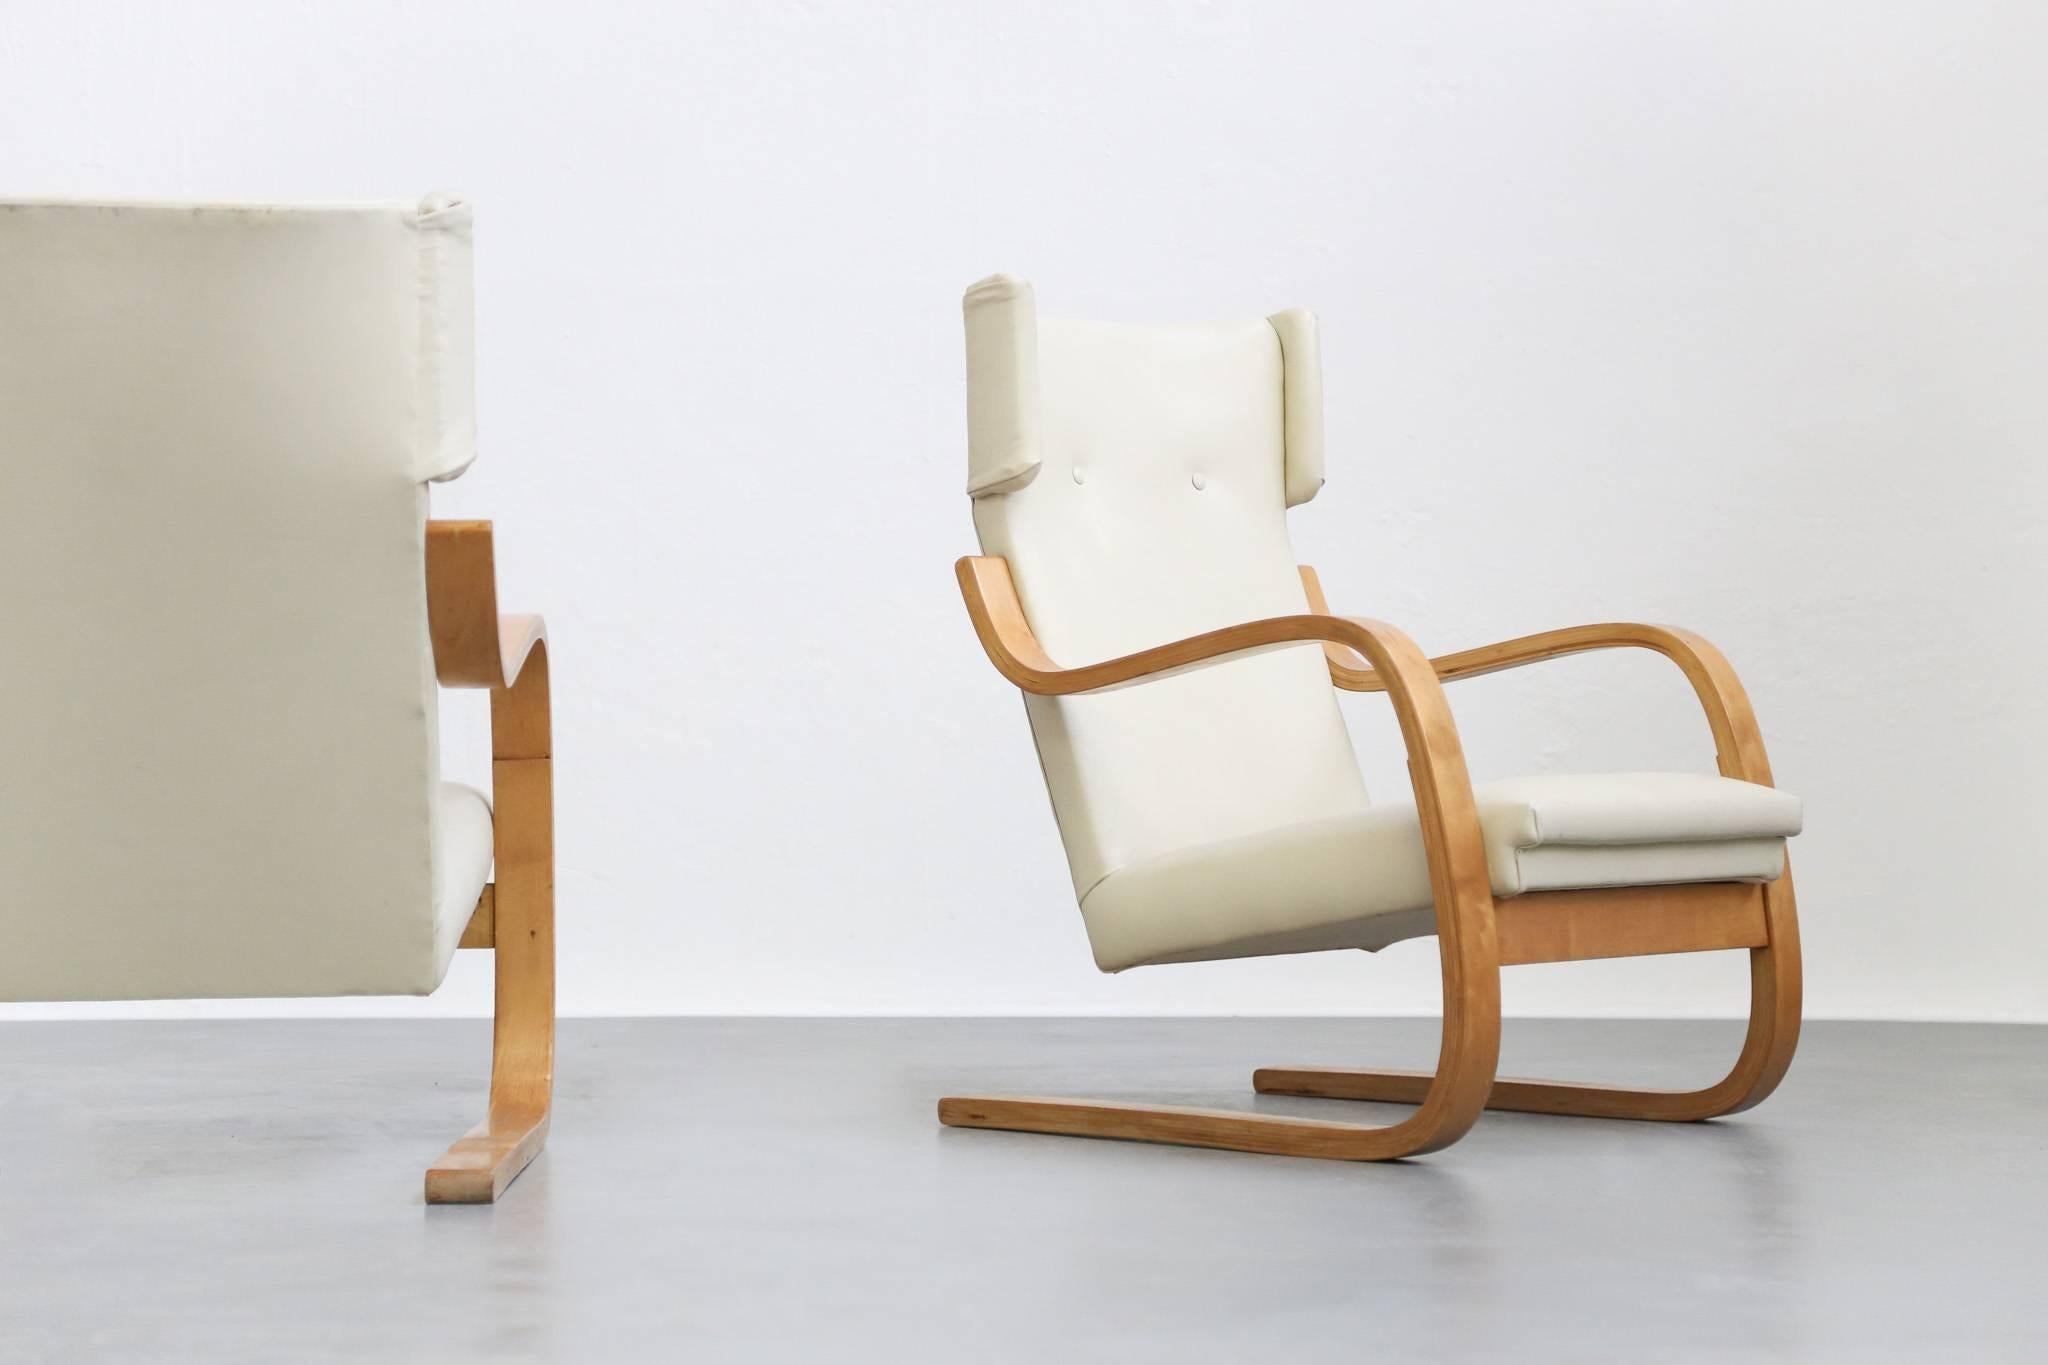 Mid-20th Century Pair of Lounge Chairs Model 401 by Alvar Aalto, 1935 Finland Design